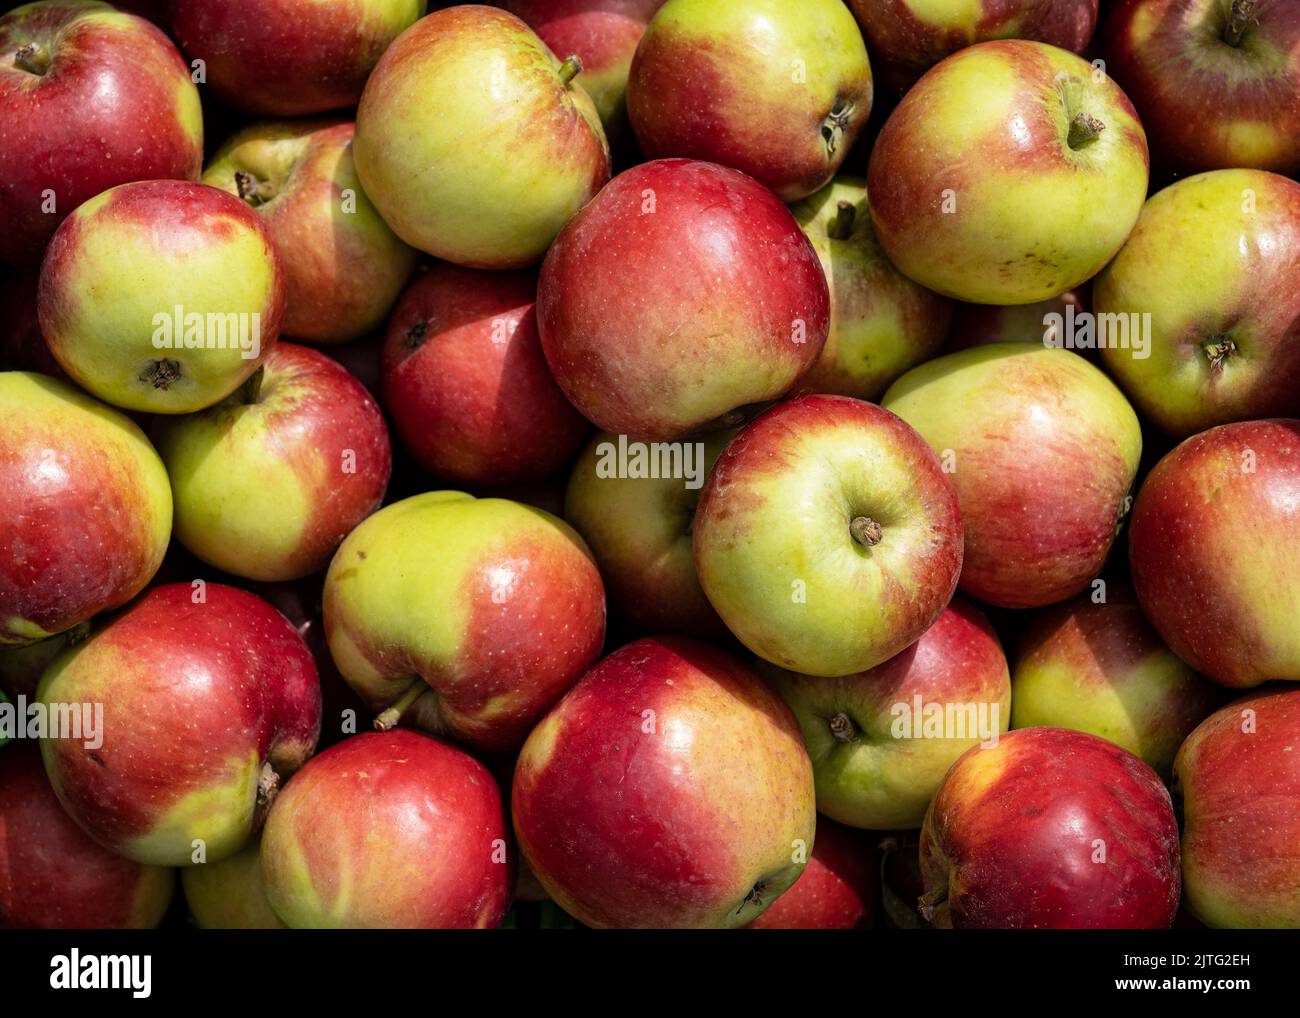 Red apples on display at a market Stock Photo